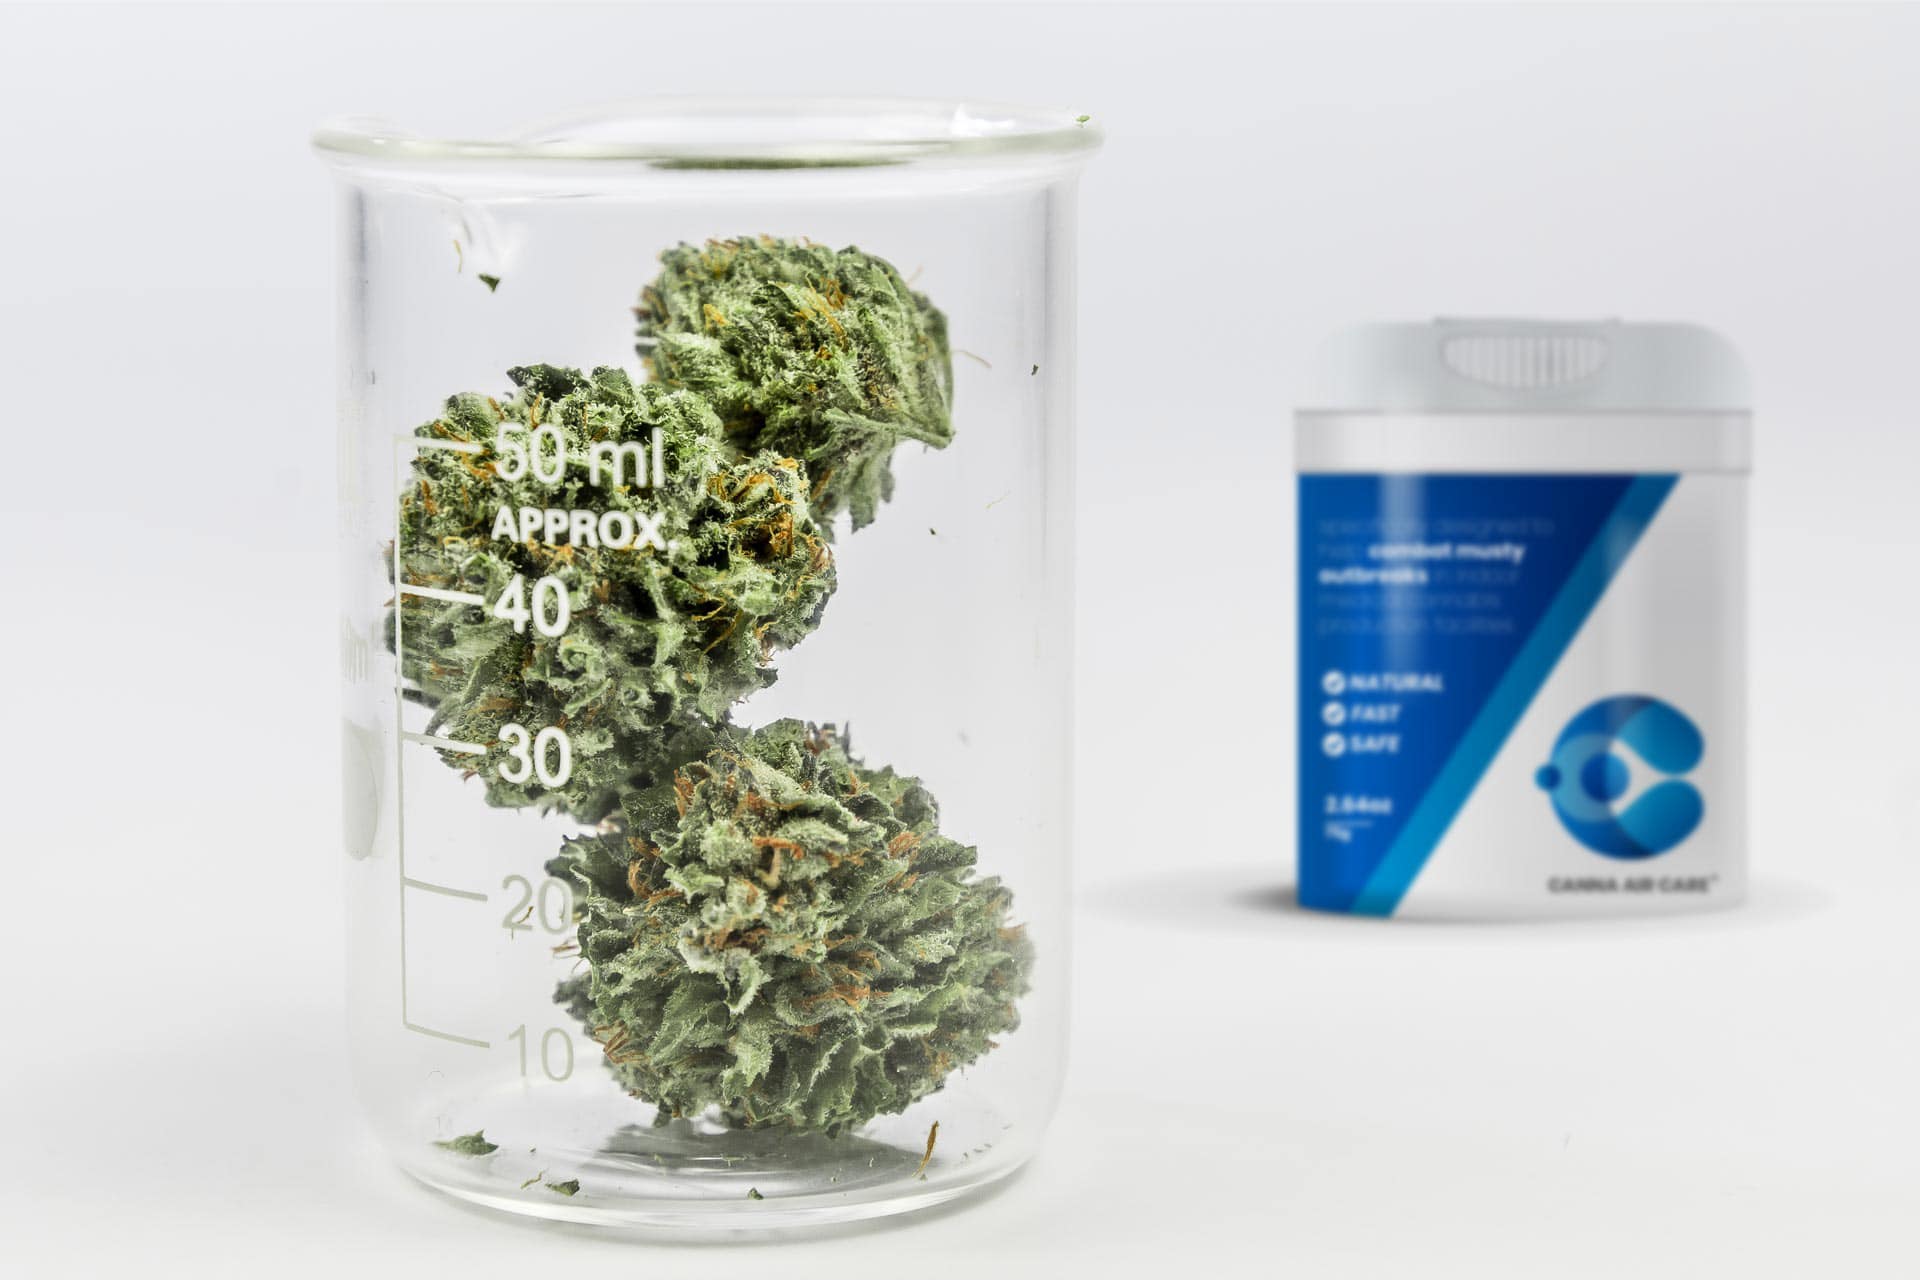 Canna Air Care Medical Cannabis Grow Room Product Packaging Design